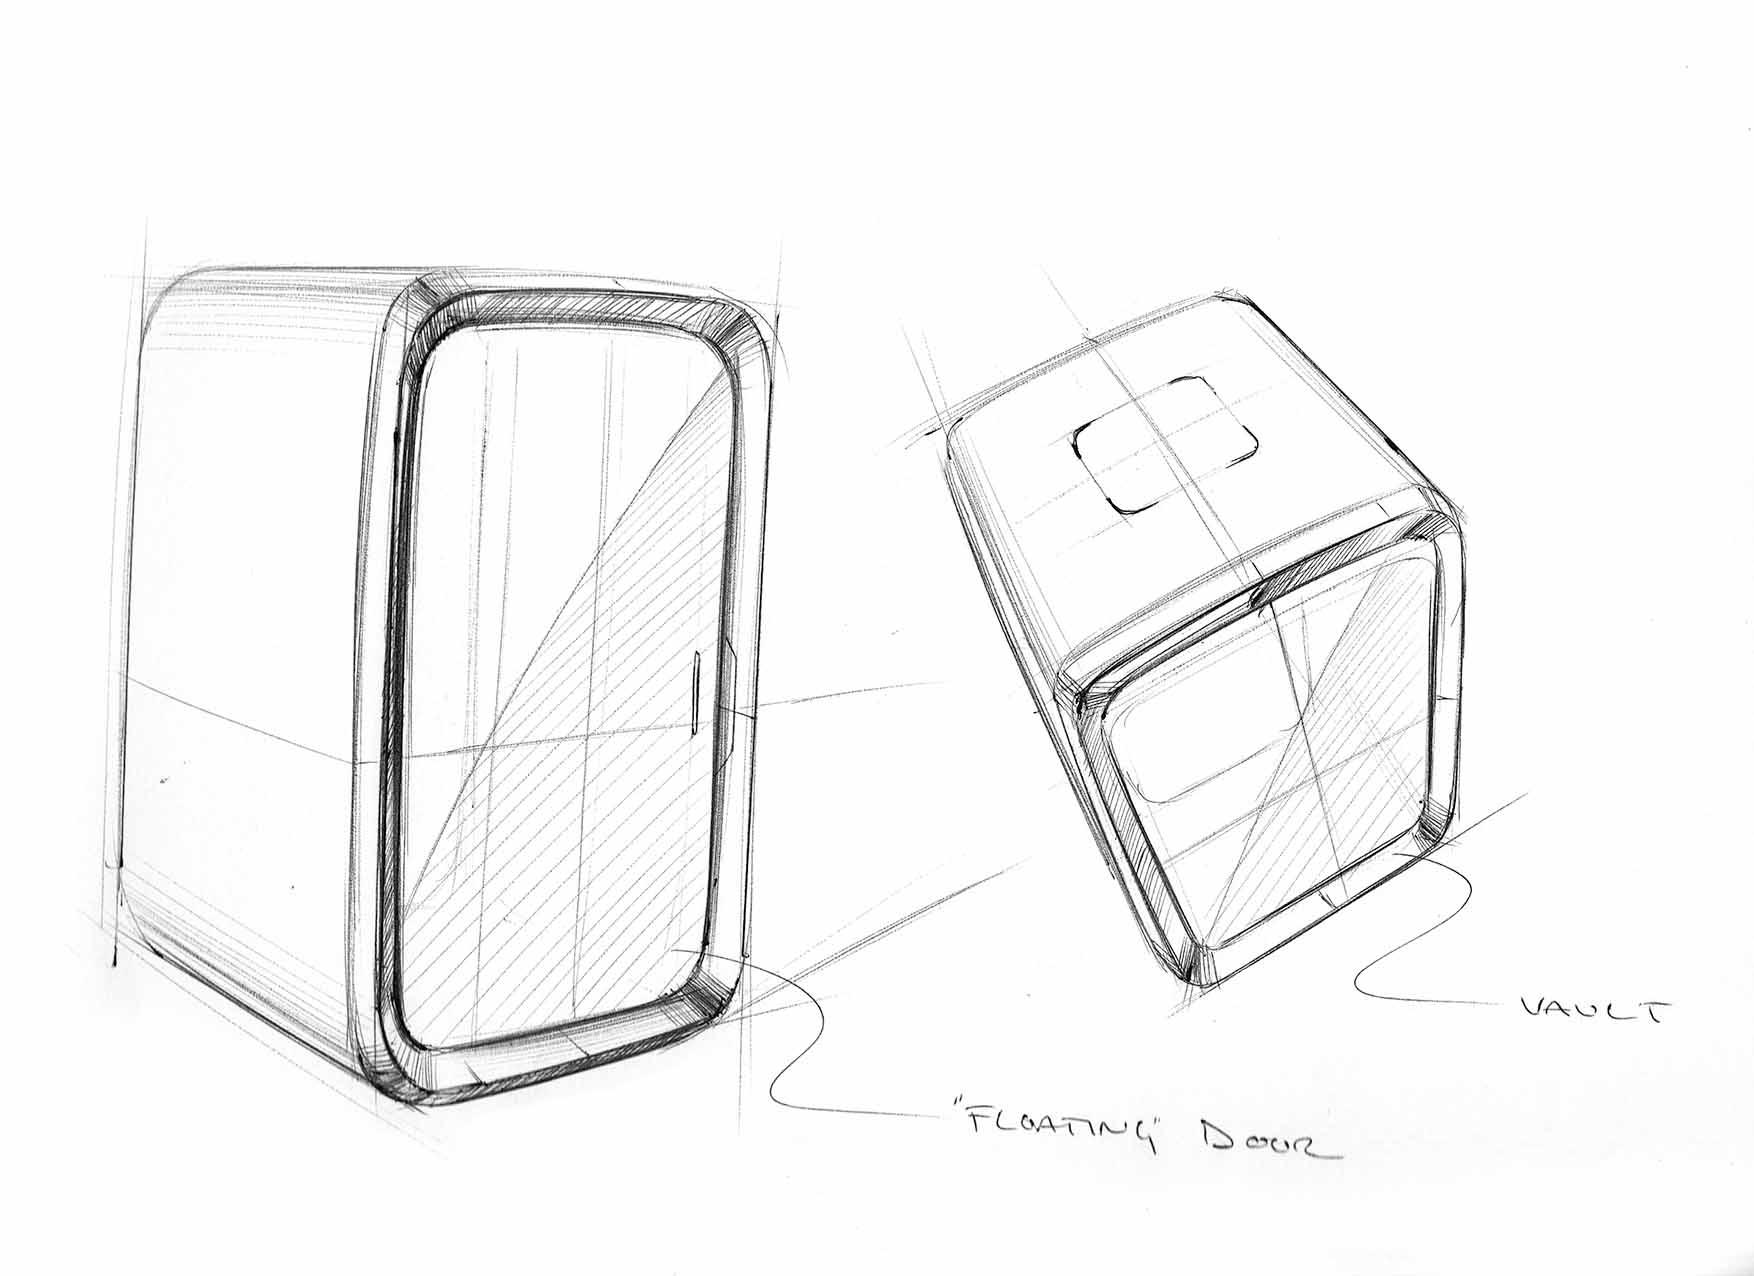 Sketches of Framery One phone booth